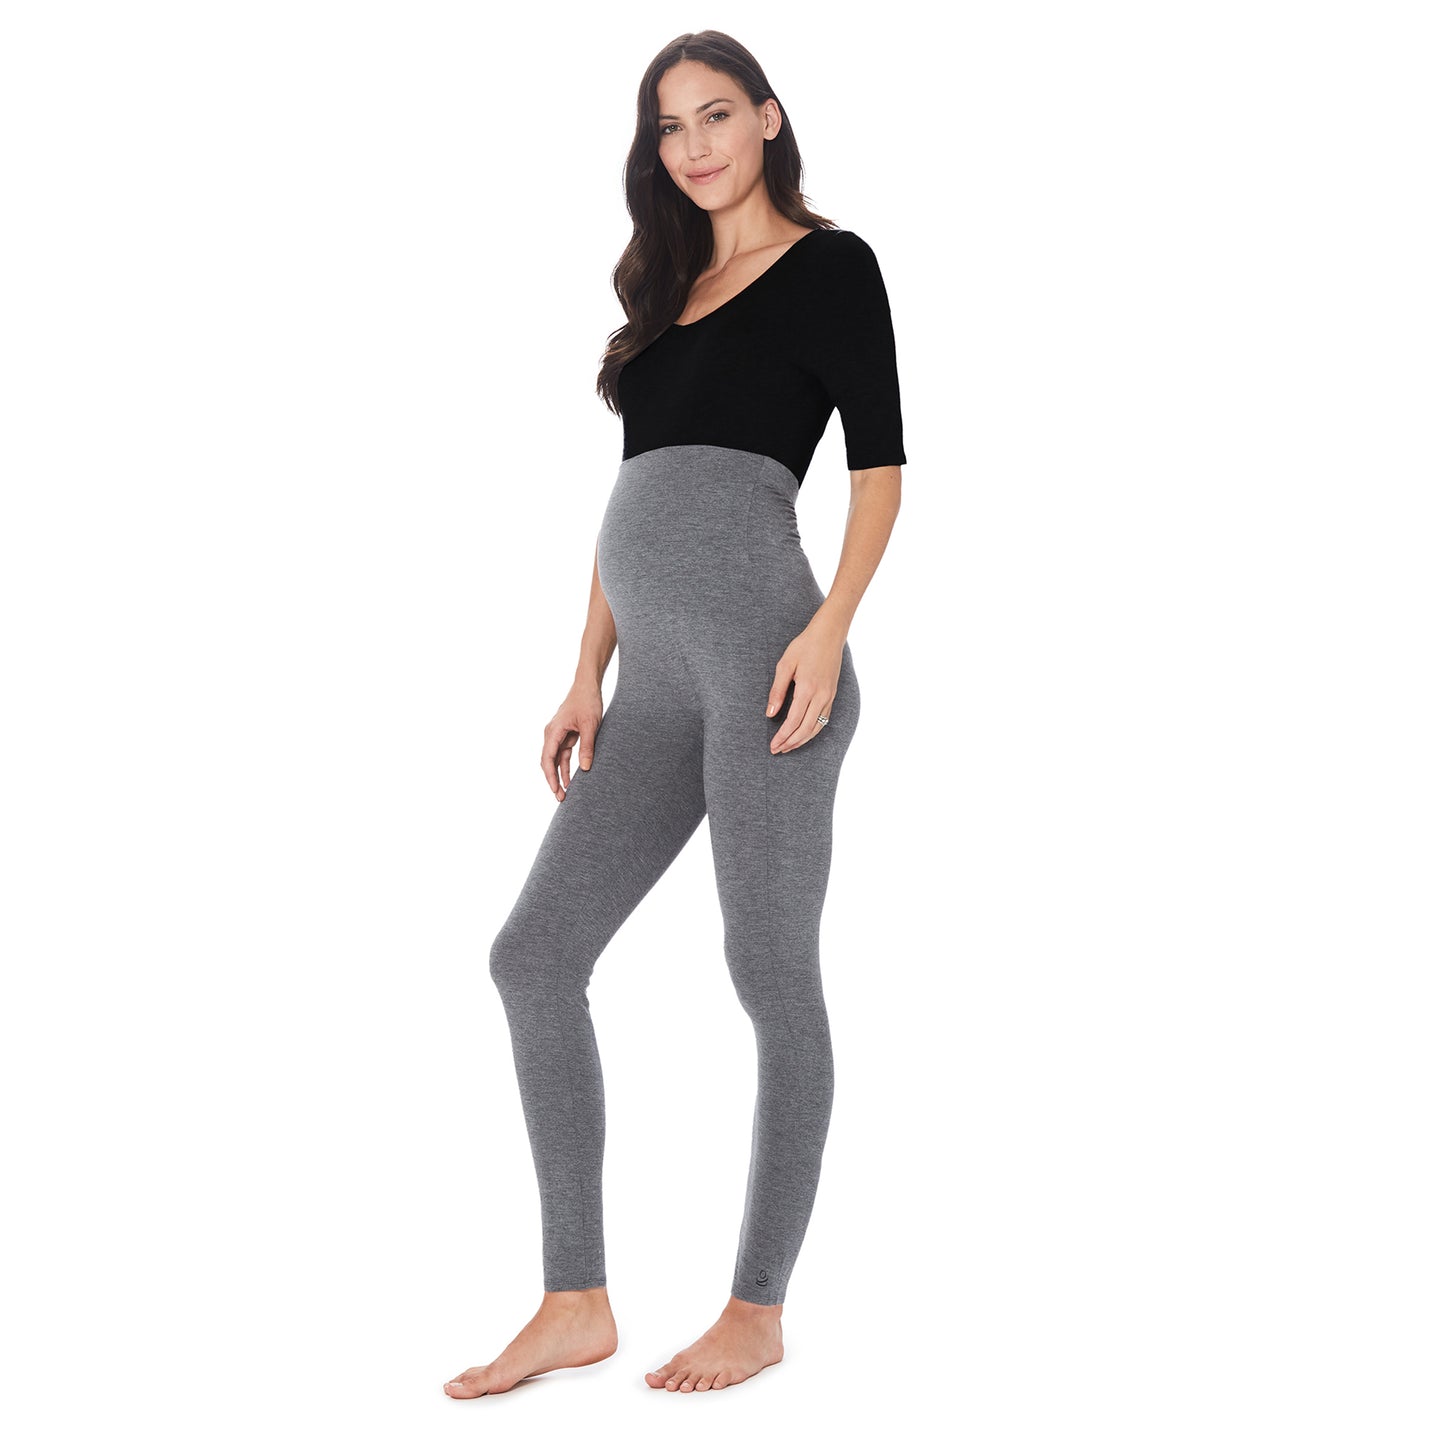  Charcoal Heather; Model is wearing size S. She is 5’11”, Bust 34”, Waist 25”, Hips 36.5”. @A lady wearing a charcoal heather maternity legging.  #Model is wearing a maternity bump.